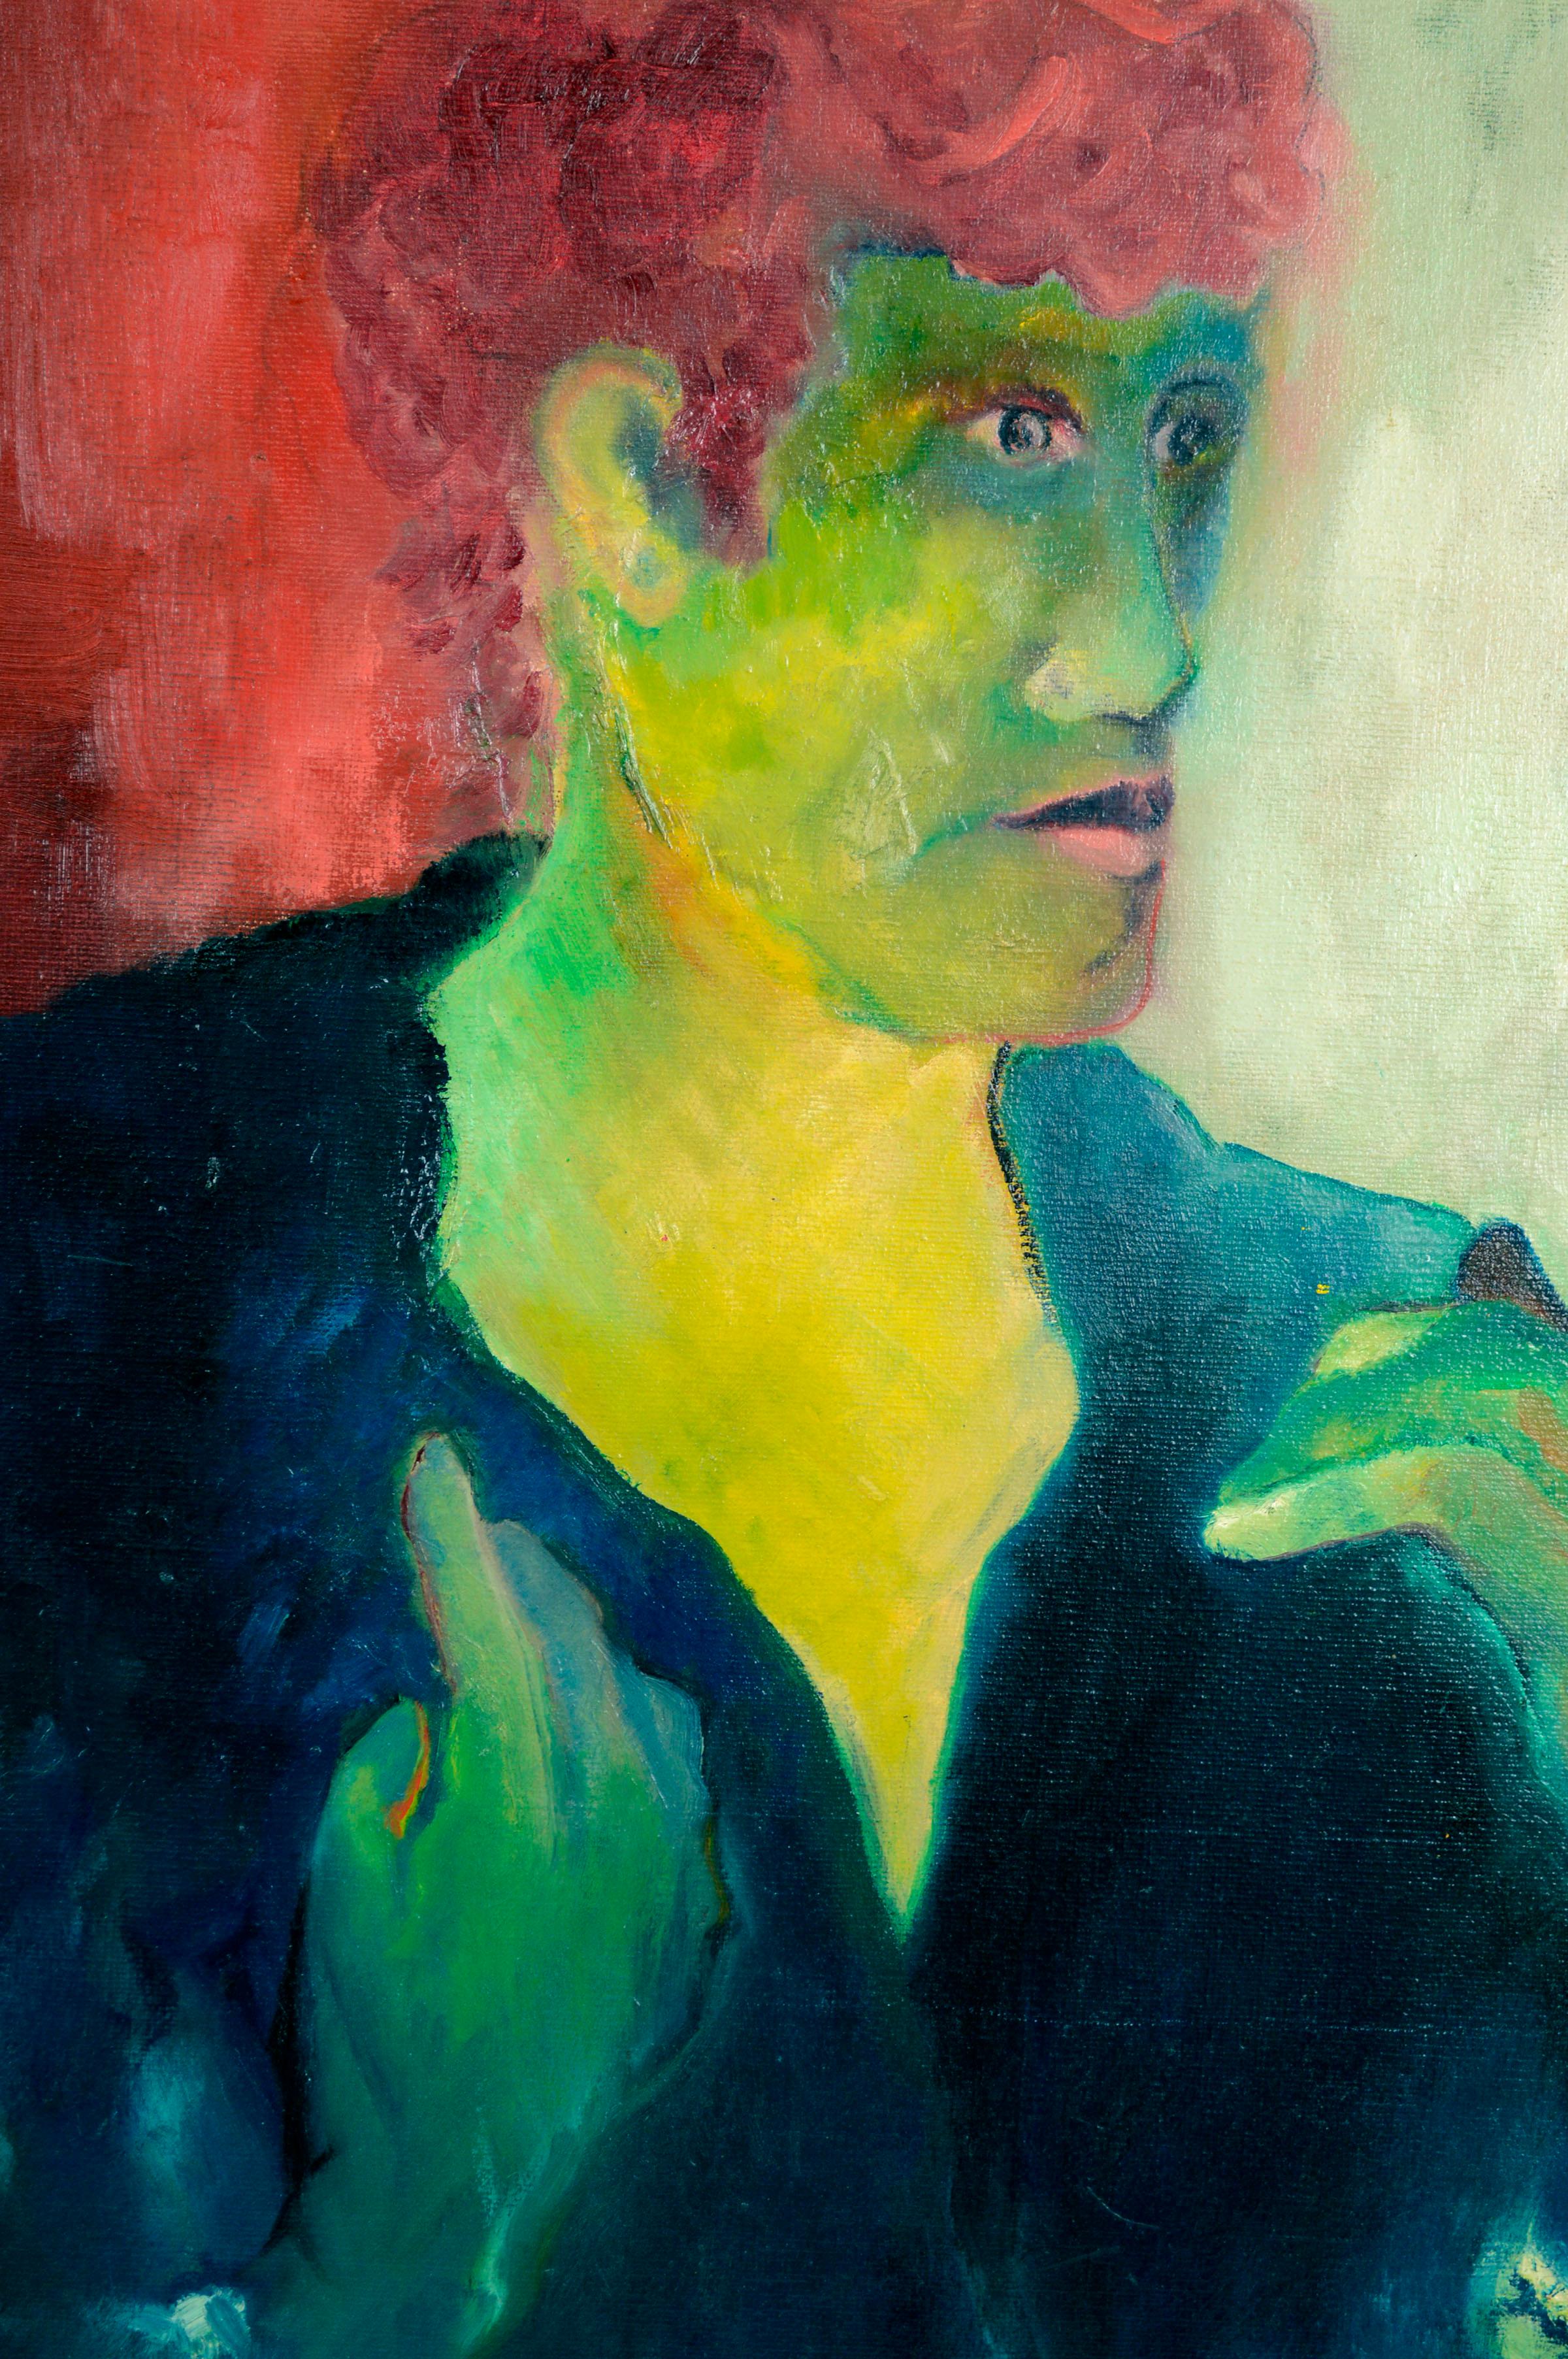 Mid Century Fauvist Portrait of a Man - Painting by Sydney Helfman